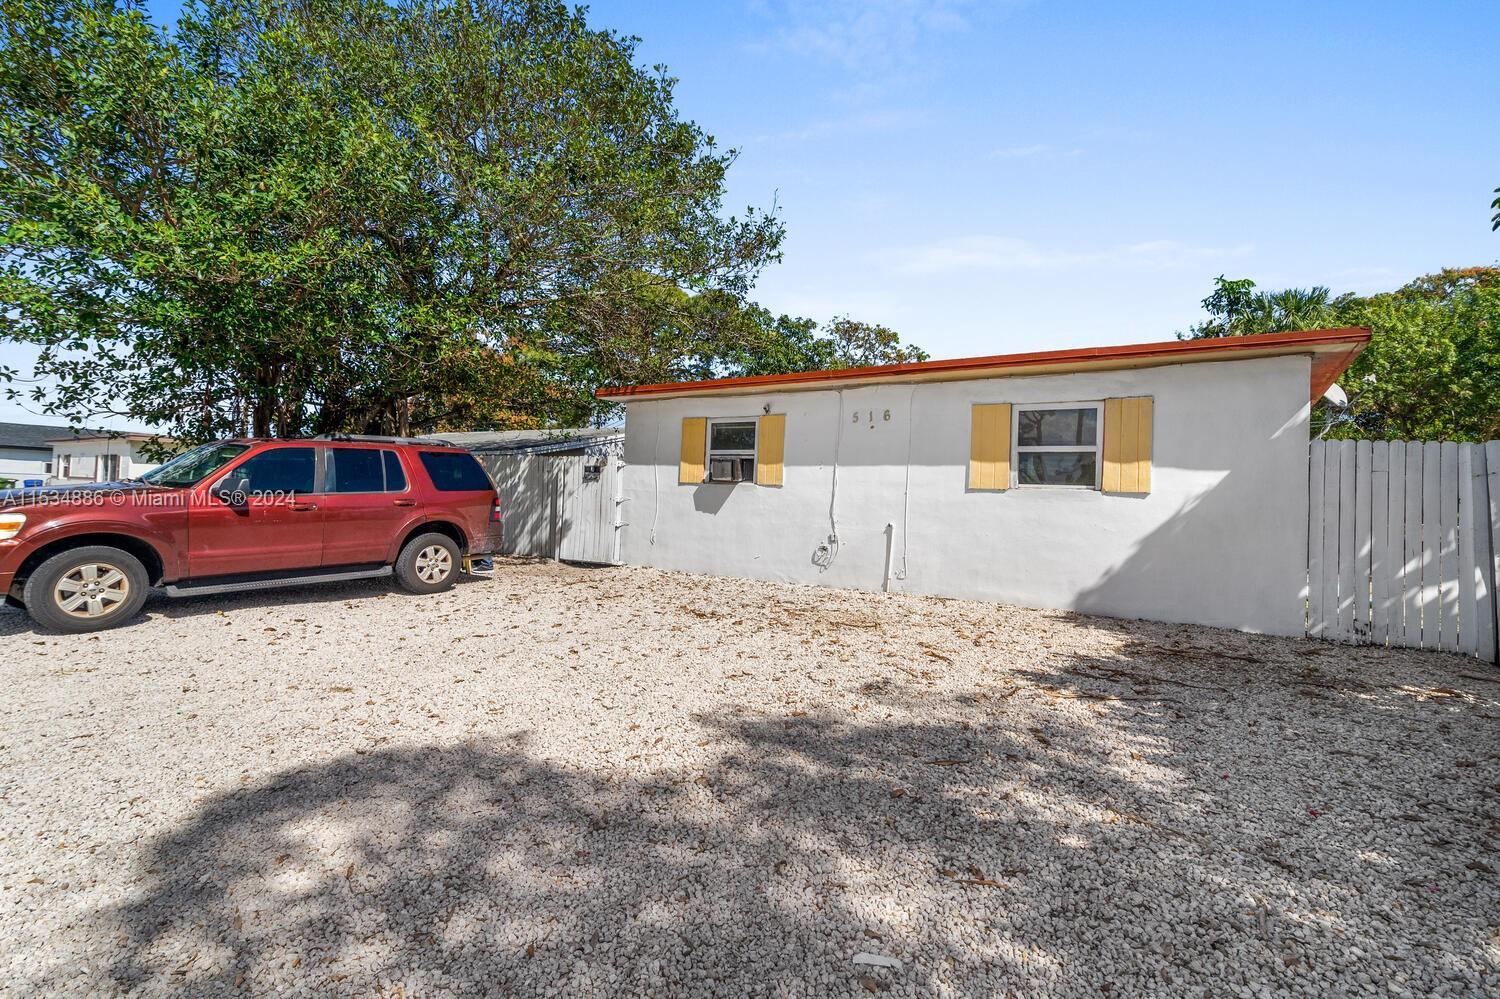 Photo of 516 NW 18th Ave in Fort Lauderdale, FL